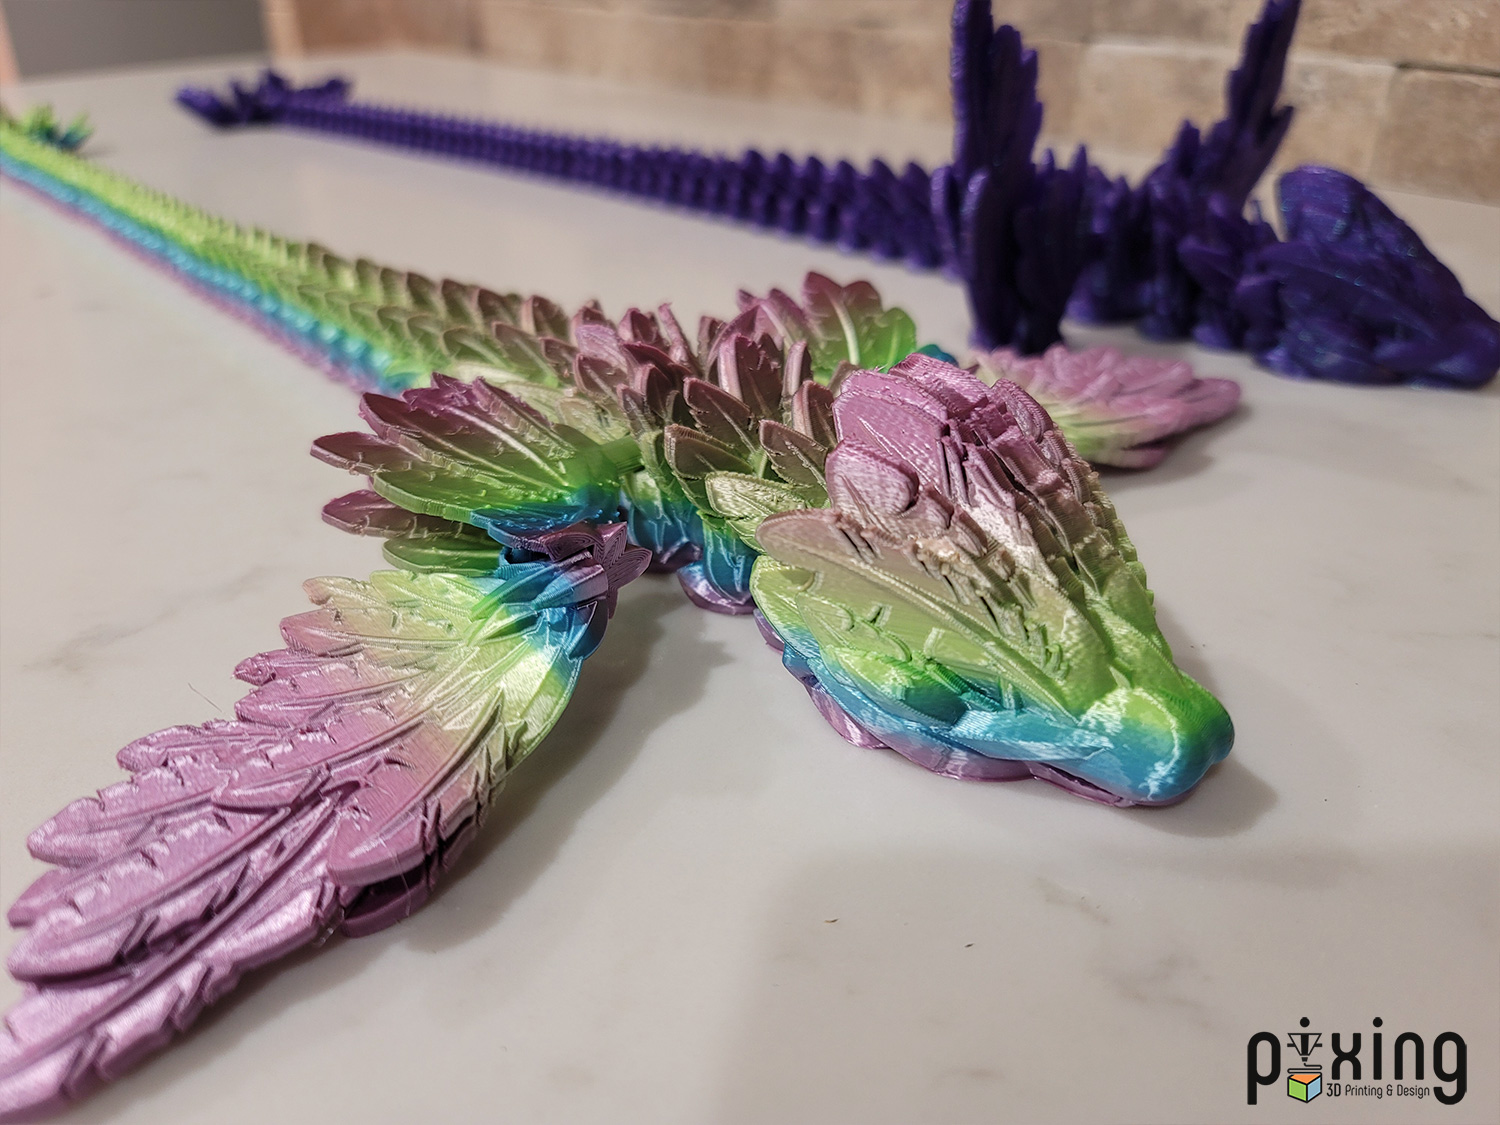 3D Printed Flying Serpent Dragon Full Length Straight - Articulating Toy